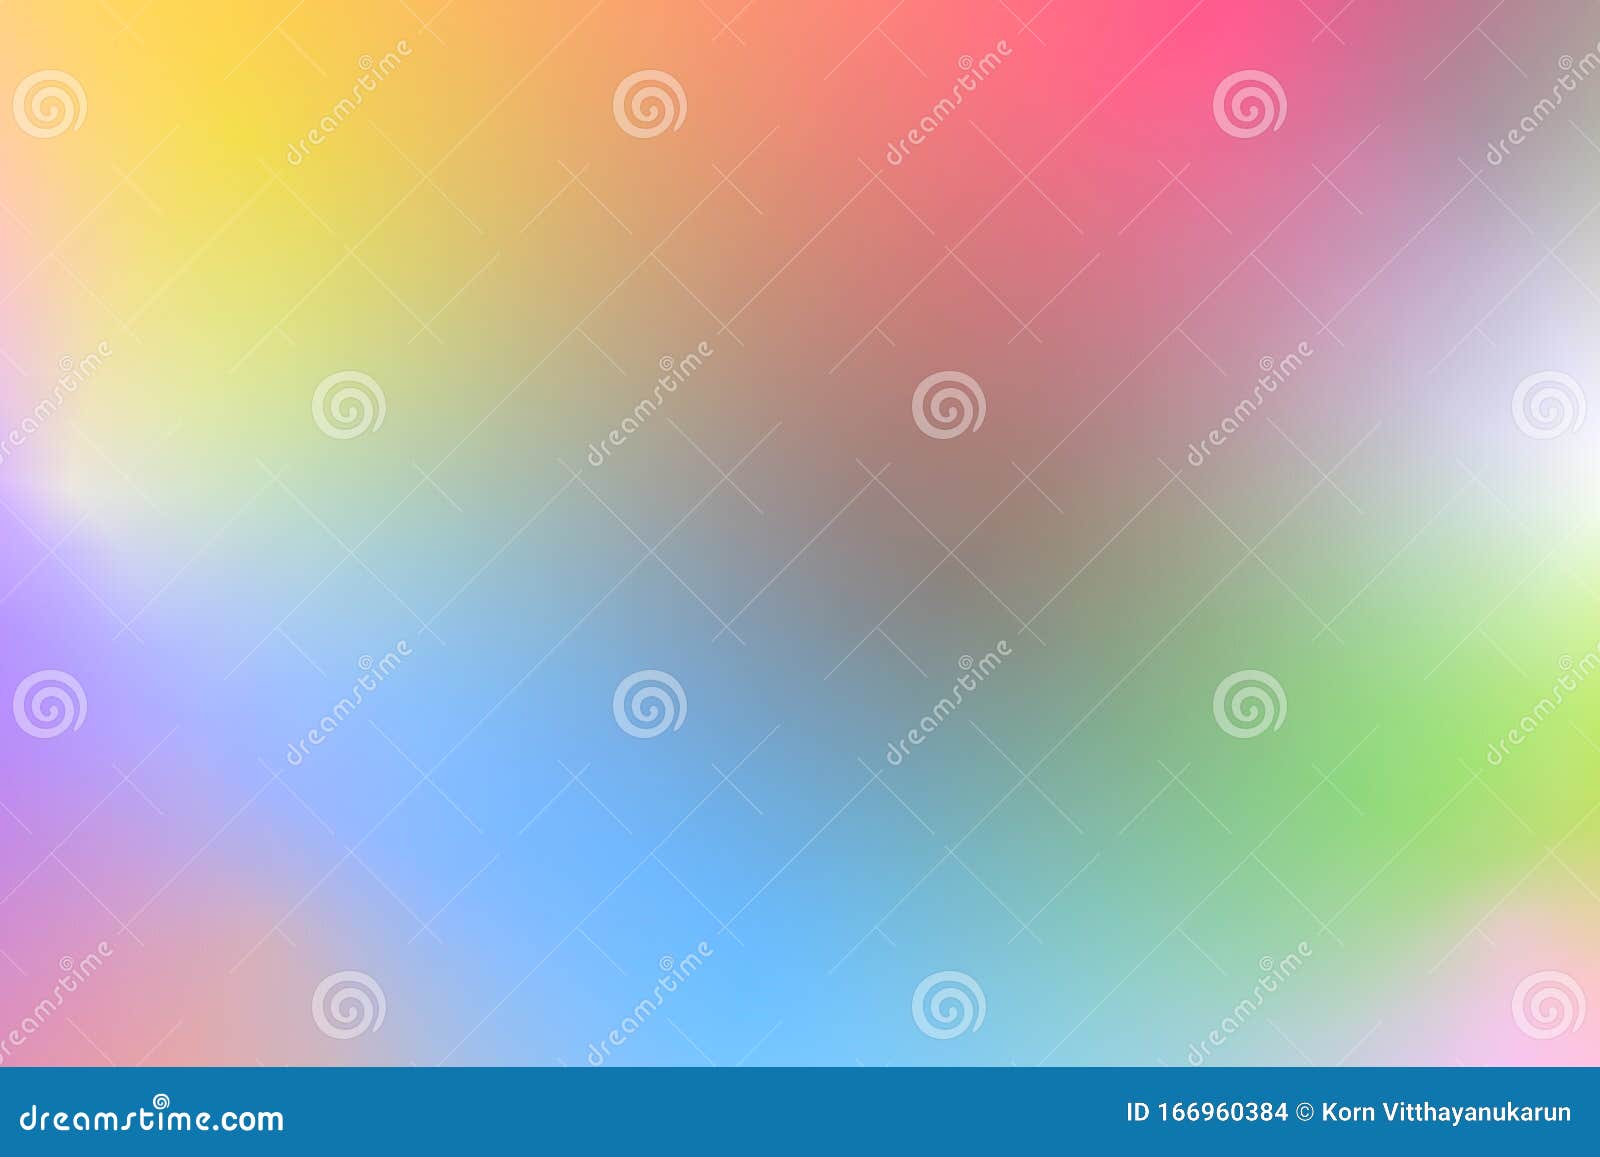 colorful gradient blur bright colors shading  abstract for background